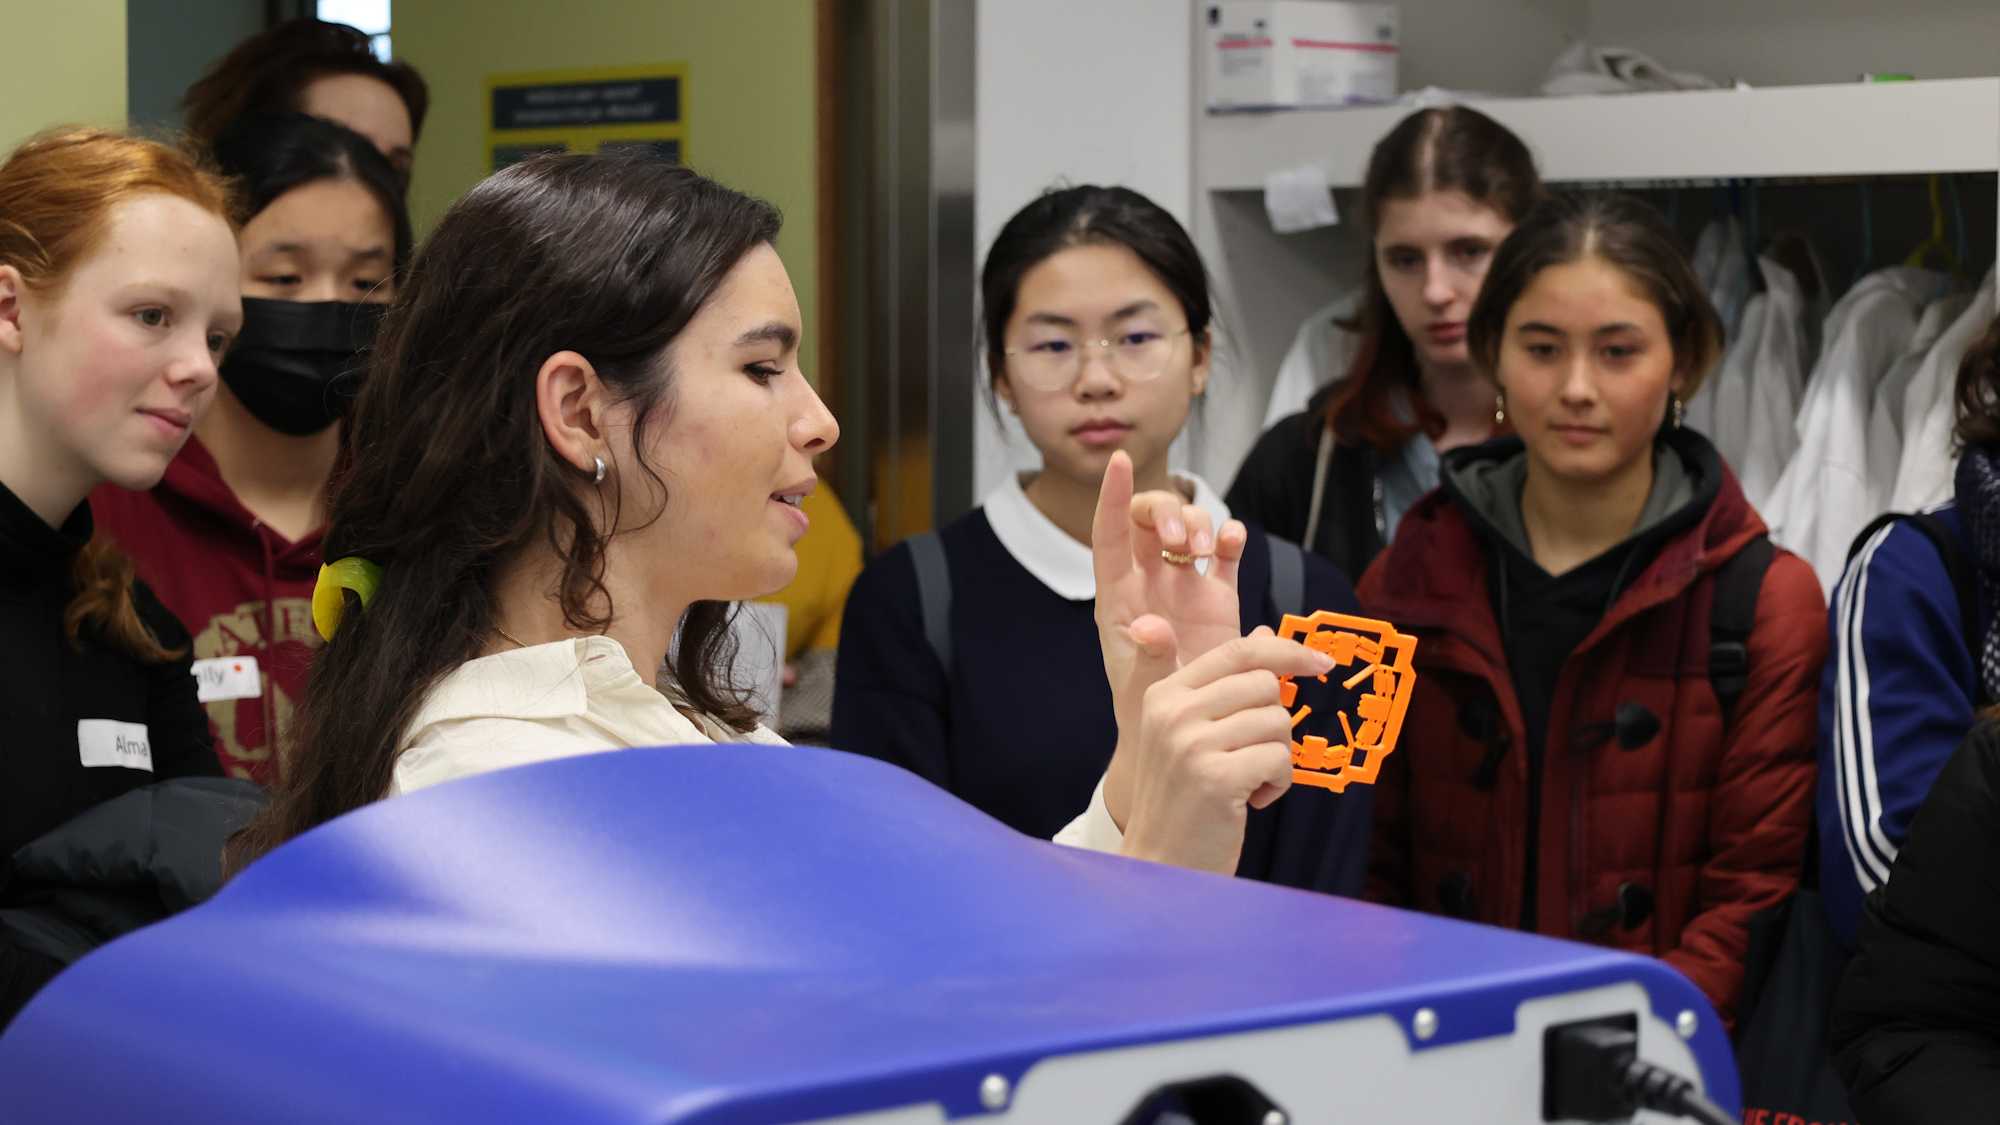 Female high school students look with interest at an object shown by a researcher